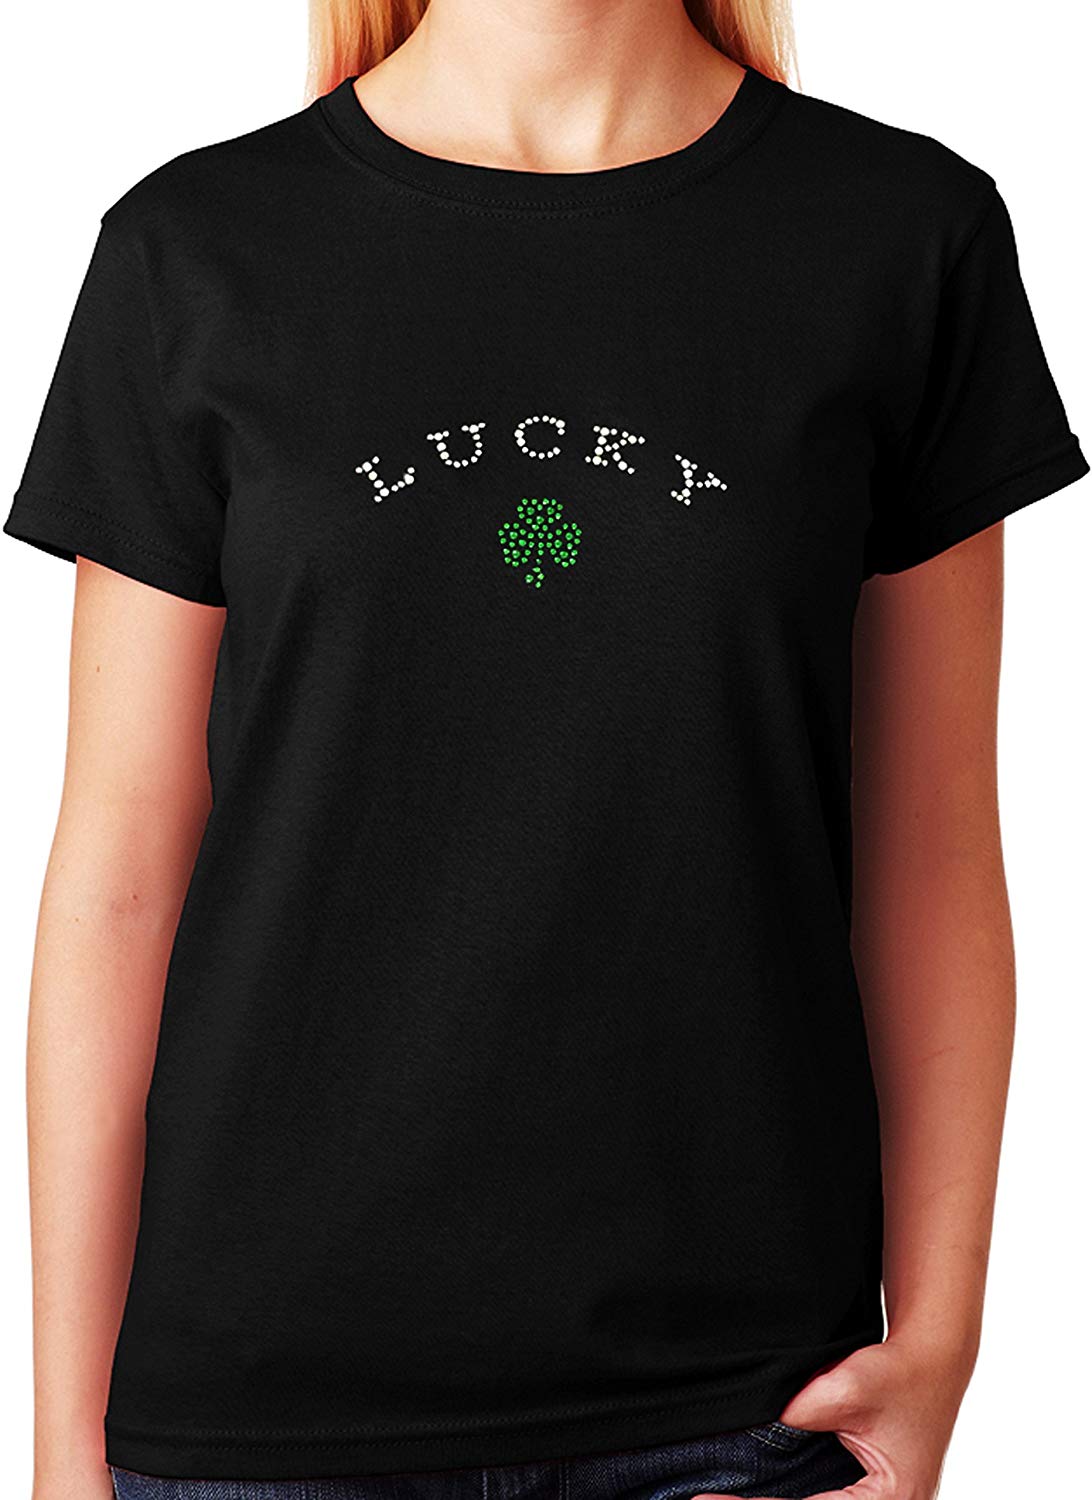 Women's / Unisex T-Shirt with Lucky 3 Leaf Clover In Rhinestones